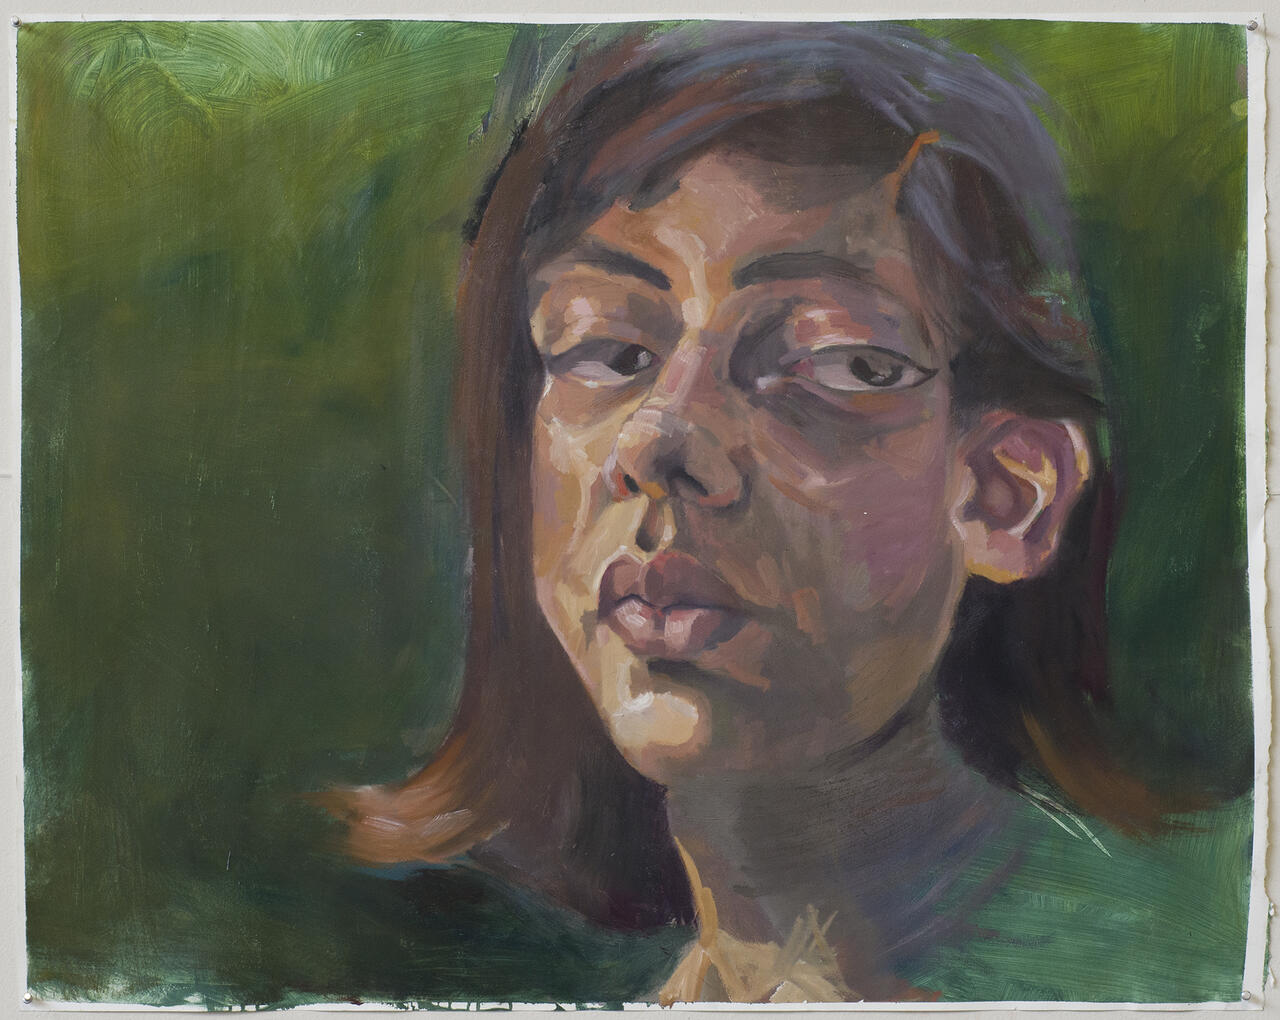 Self portrait of artist with a painted green background.